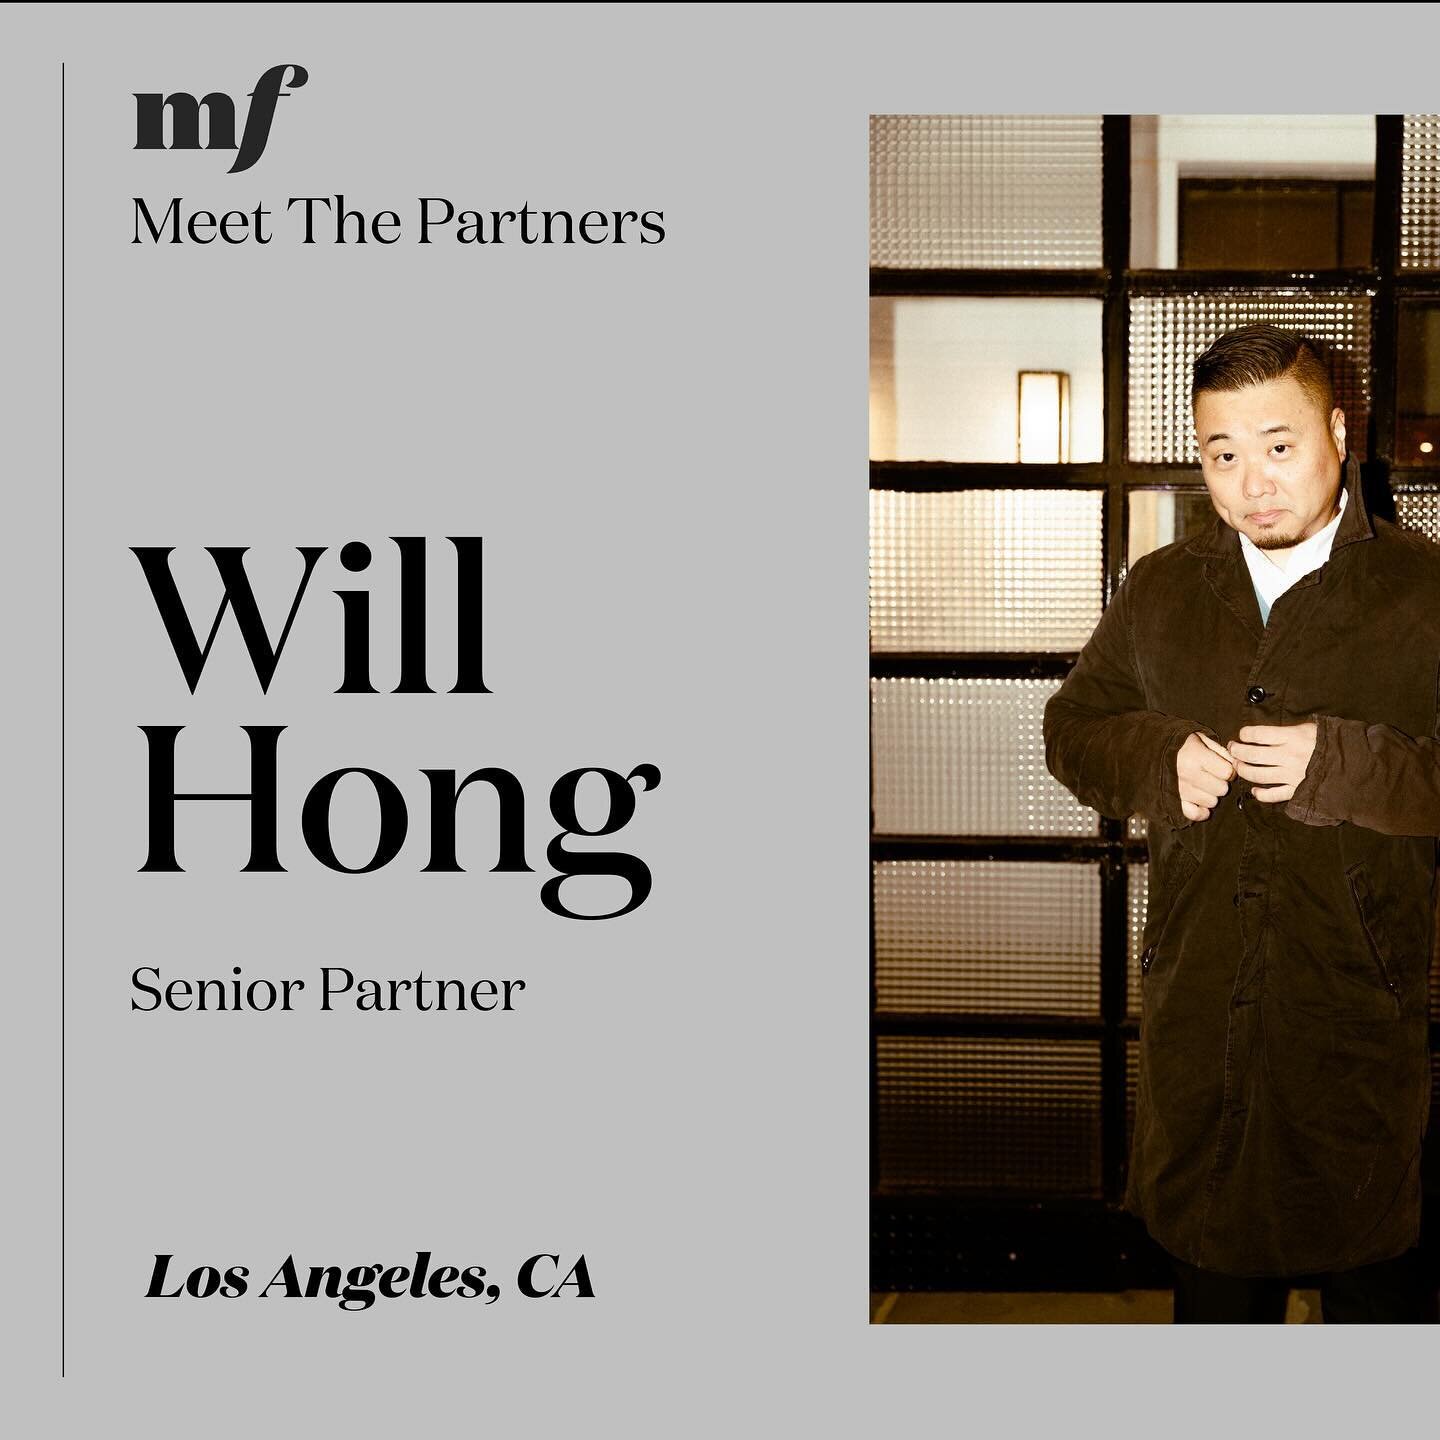 Meet The Partners!  Will Hong is a Senior Partner based out of Los Angeles.  He&rsquo;s a brilliant strategist and storyteller with a resume and client track-record that is as fascinating as it is impressive.  Hit up @willkjhong and ask him about his